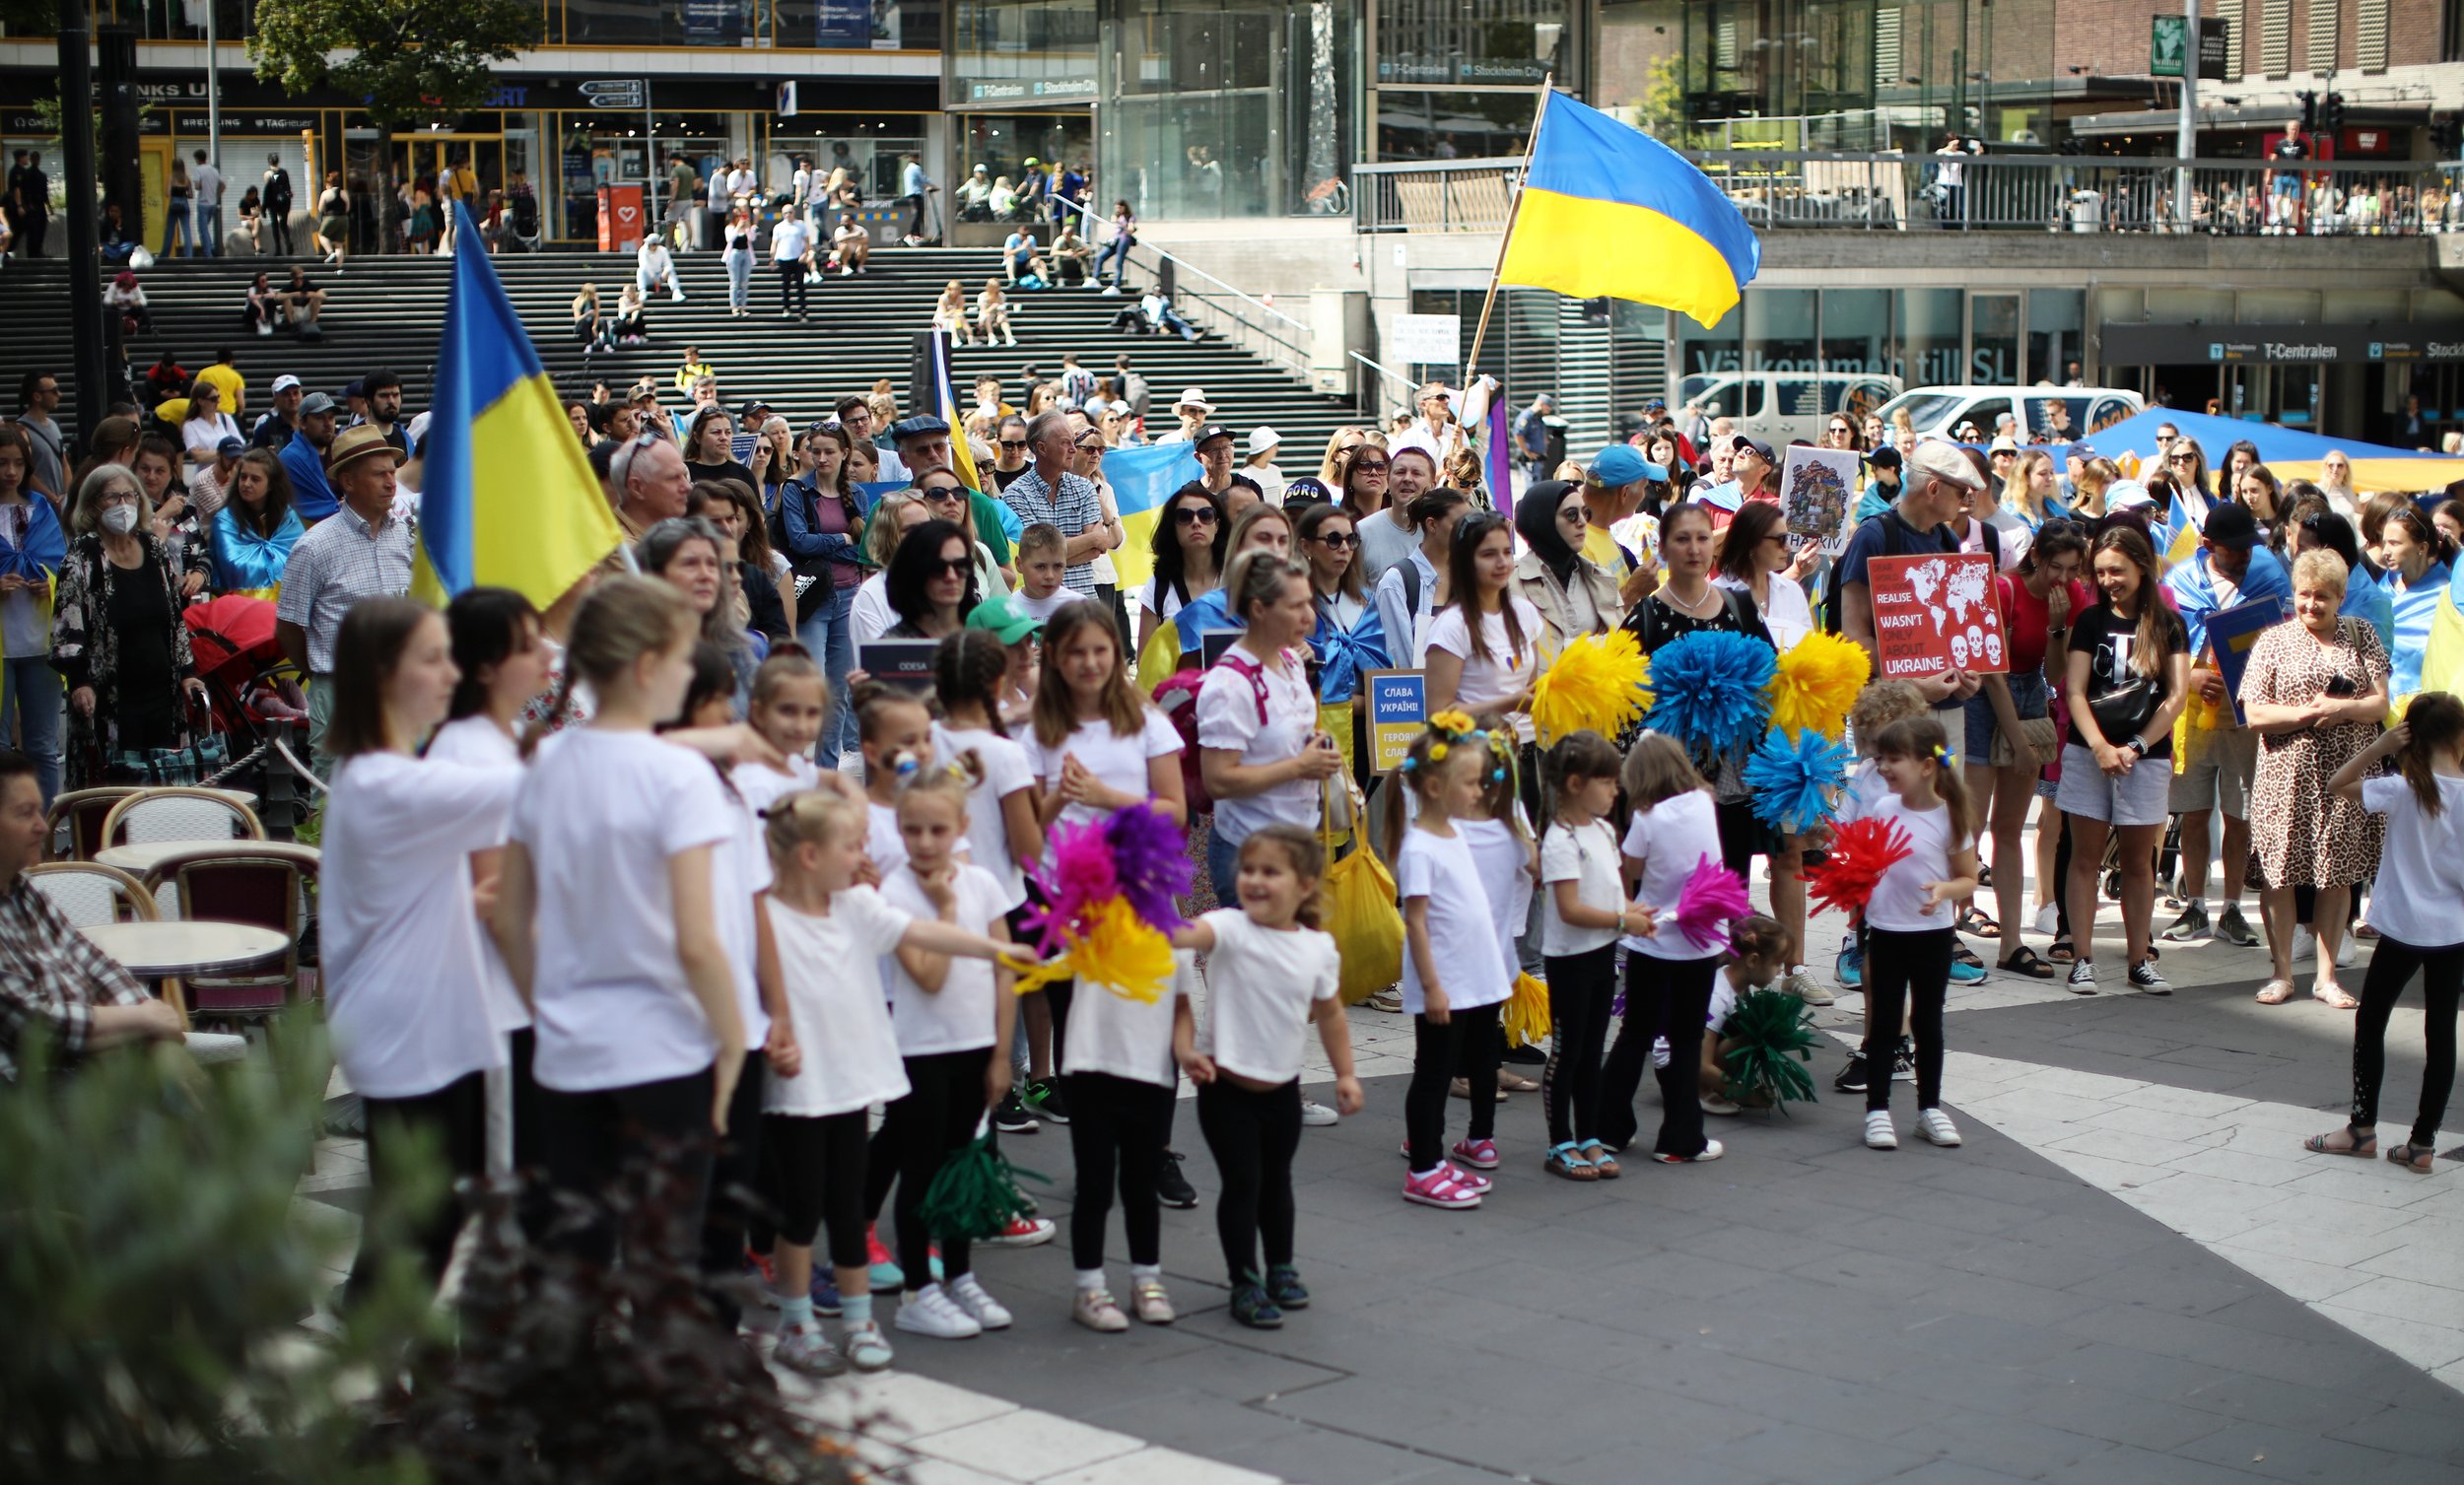  Weekly protests are convened by the Nordic Ukraine Forum organization in Stockholm. Its aim is to create communication bridges between Nordic and Ukrainian partners as well as to spread accurate information about the war in Ukraine. 